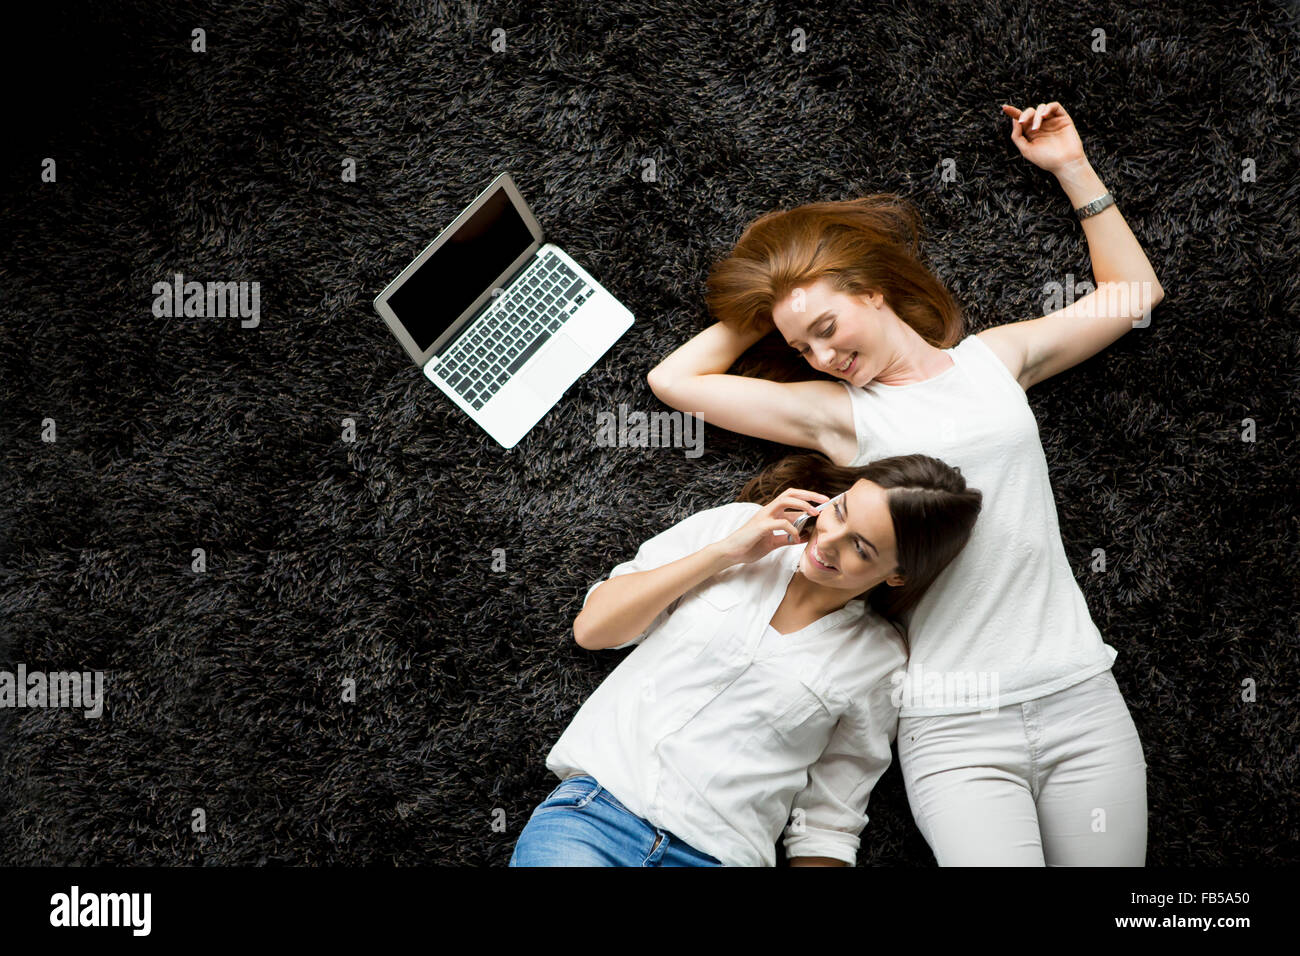 Young women laying on the carpet with laptop Stock Photo